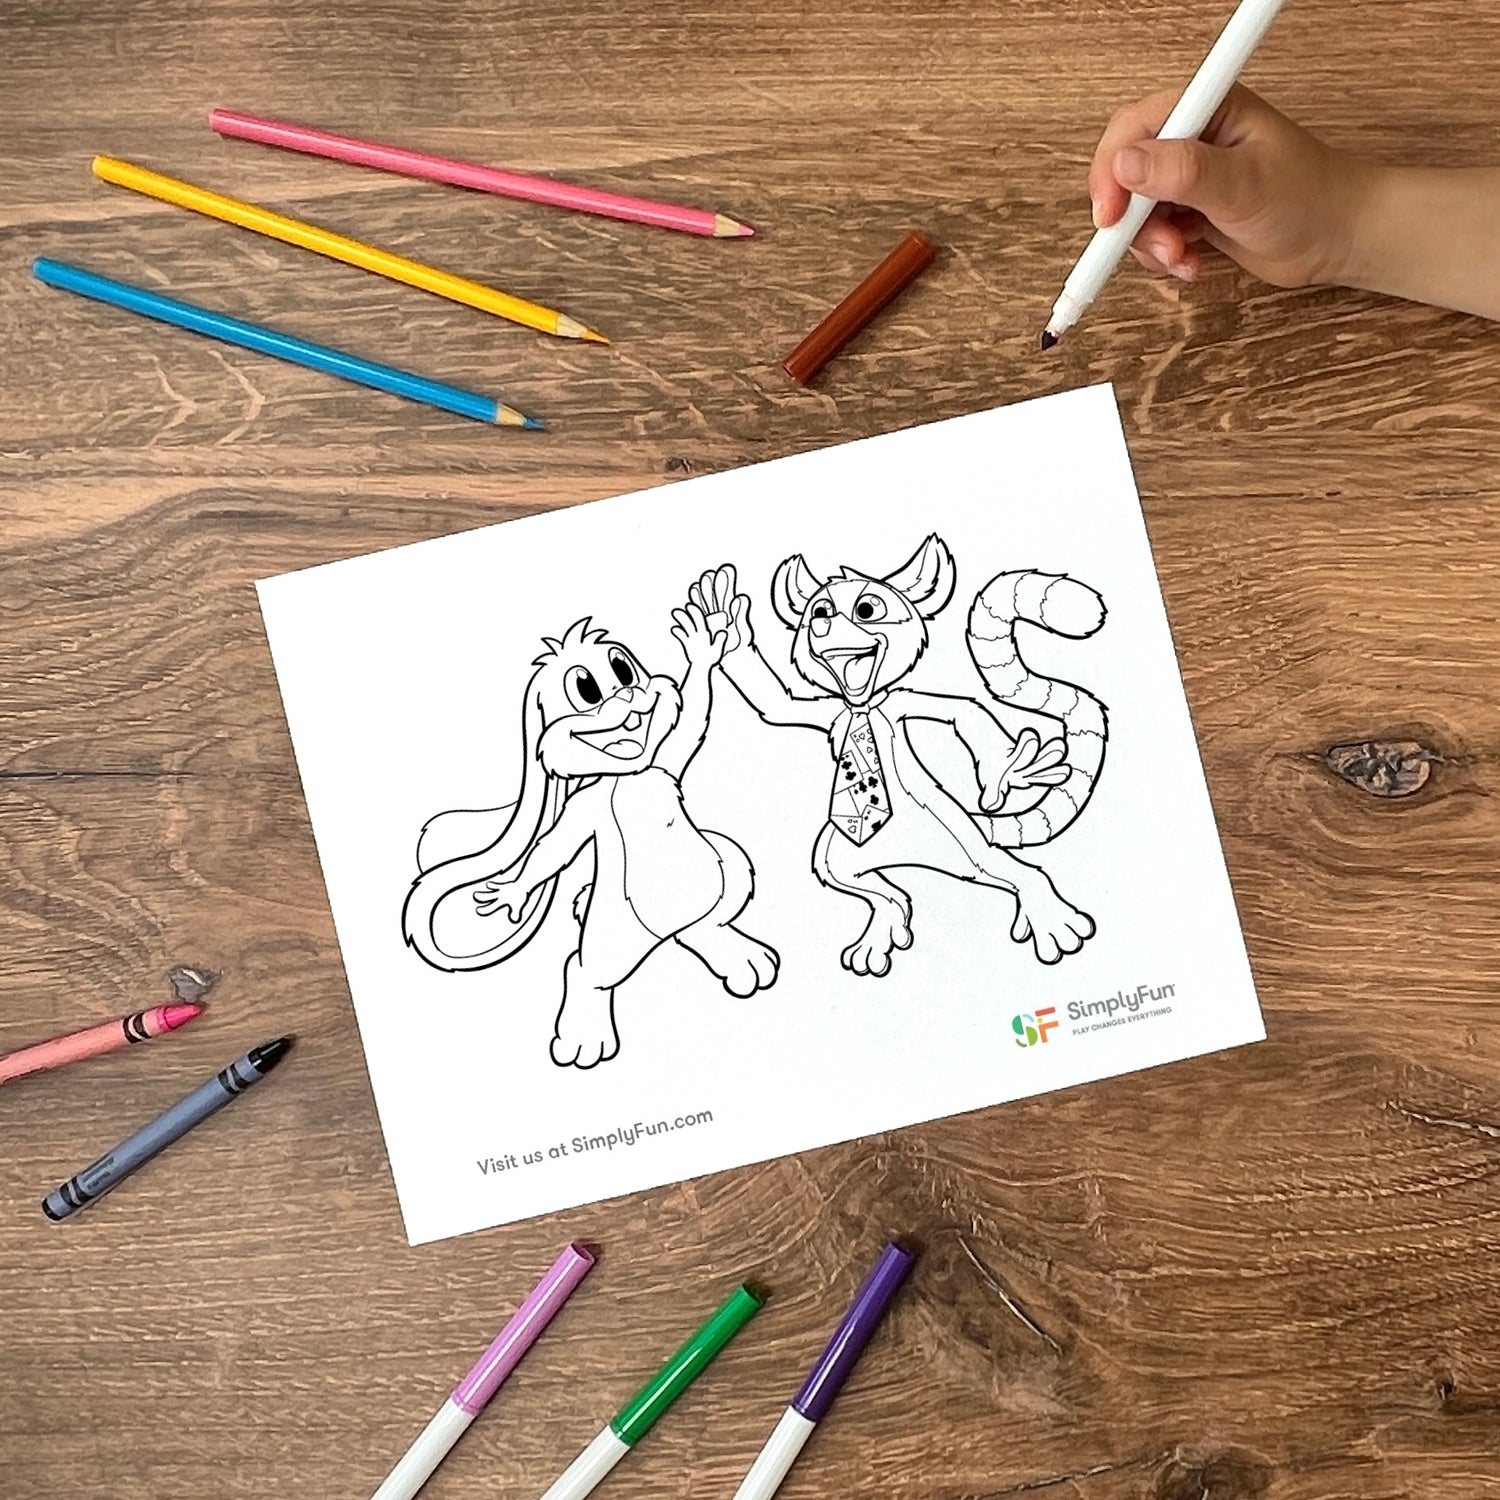 Free rabbit and lemur coloring page from SimplyFun